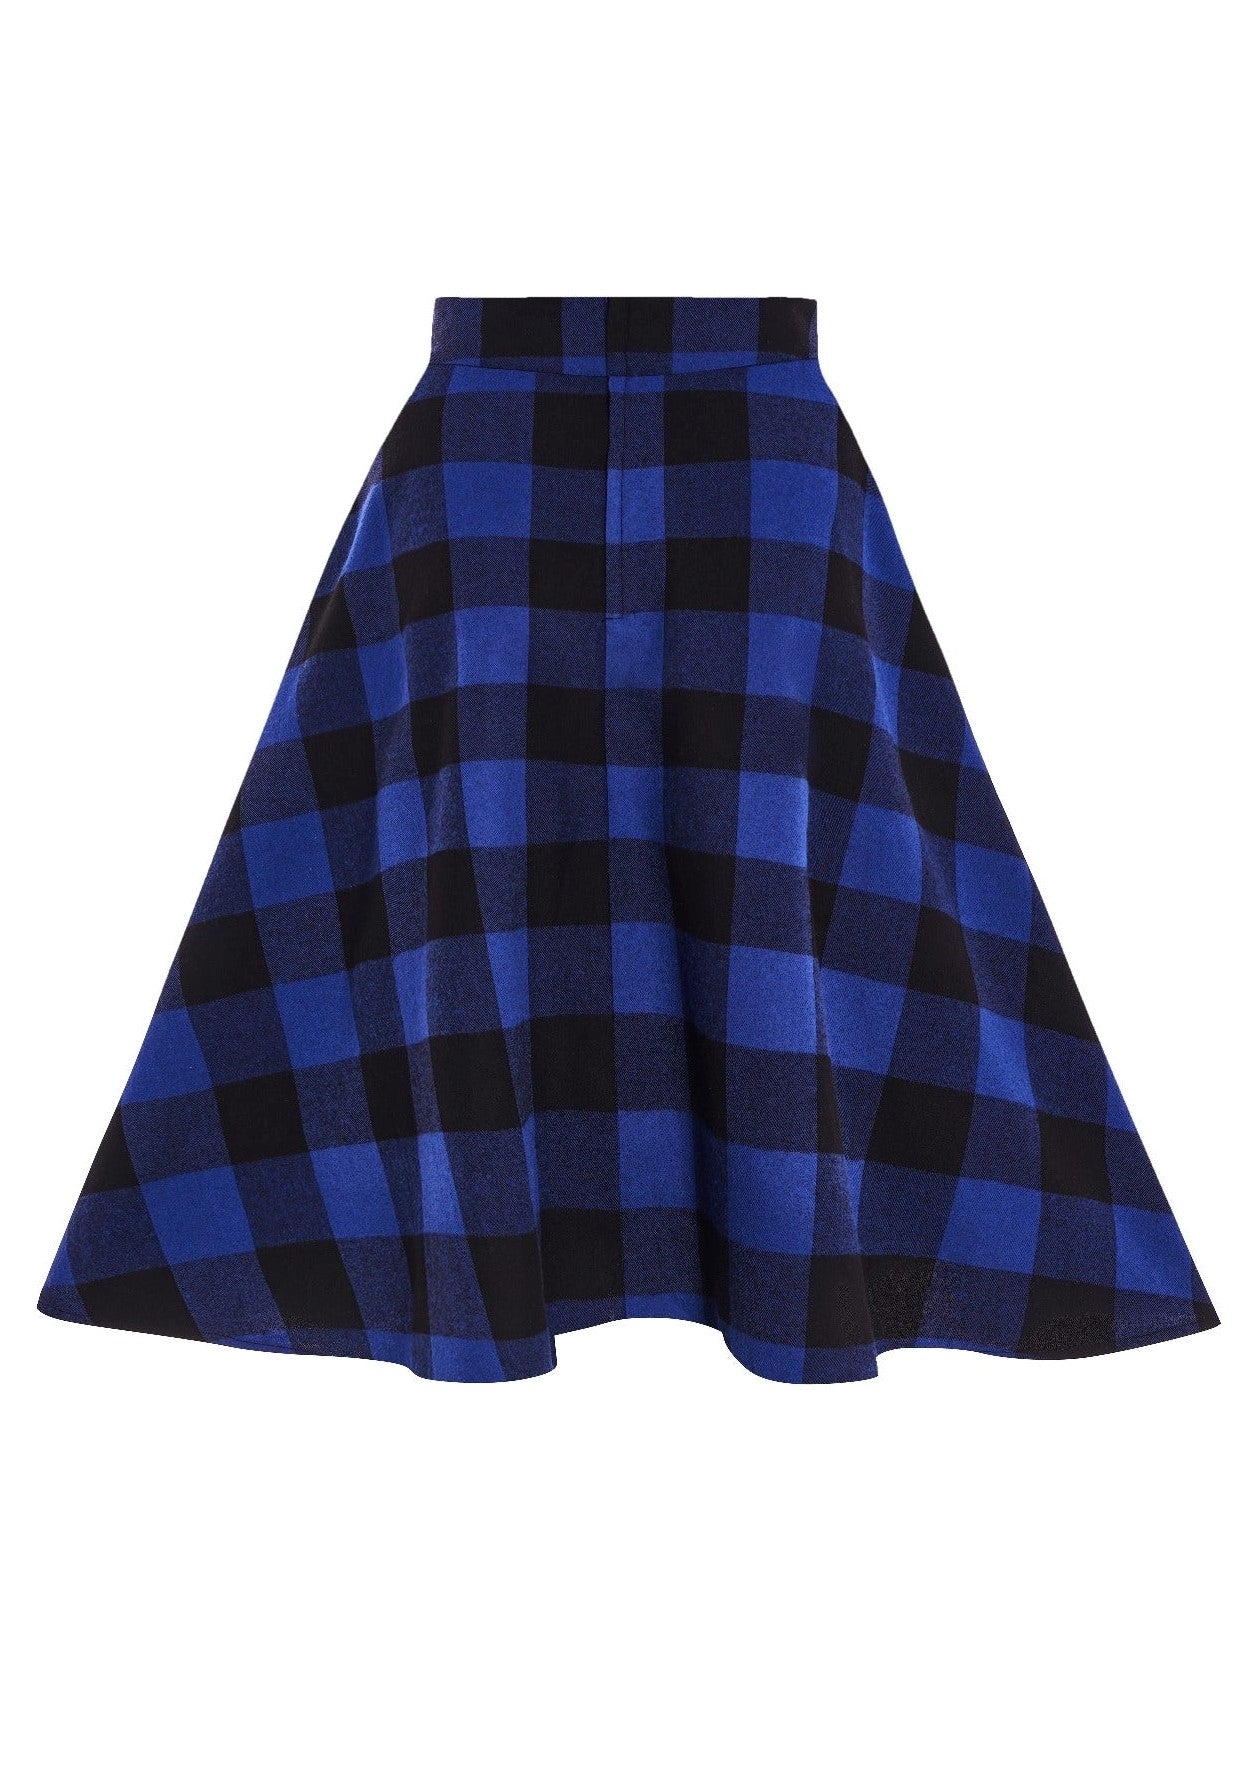 Joyce flared skirt, in blue and black check print, back view